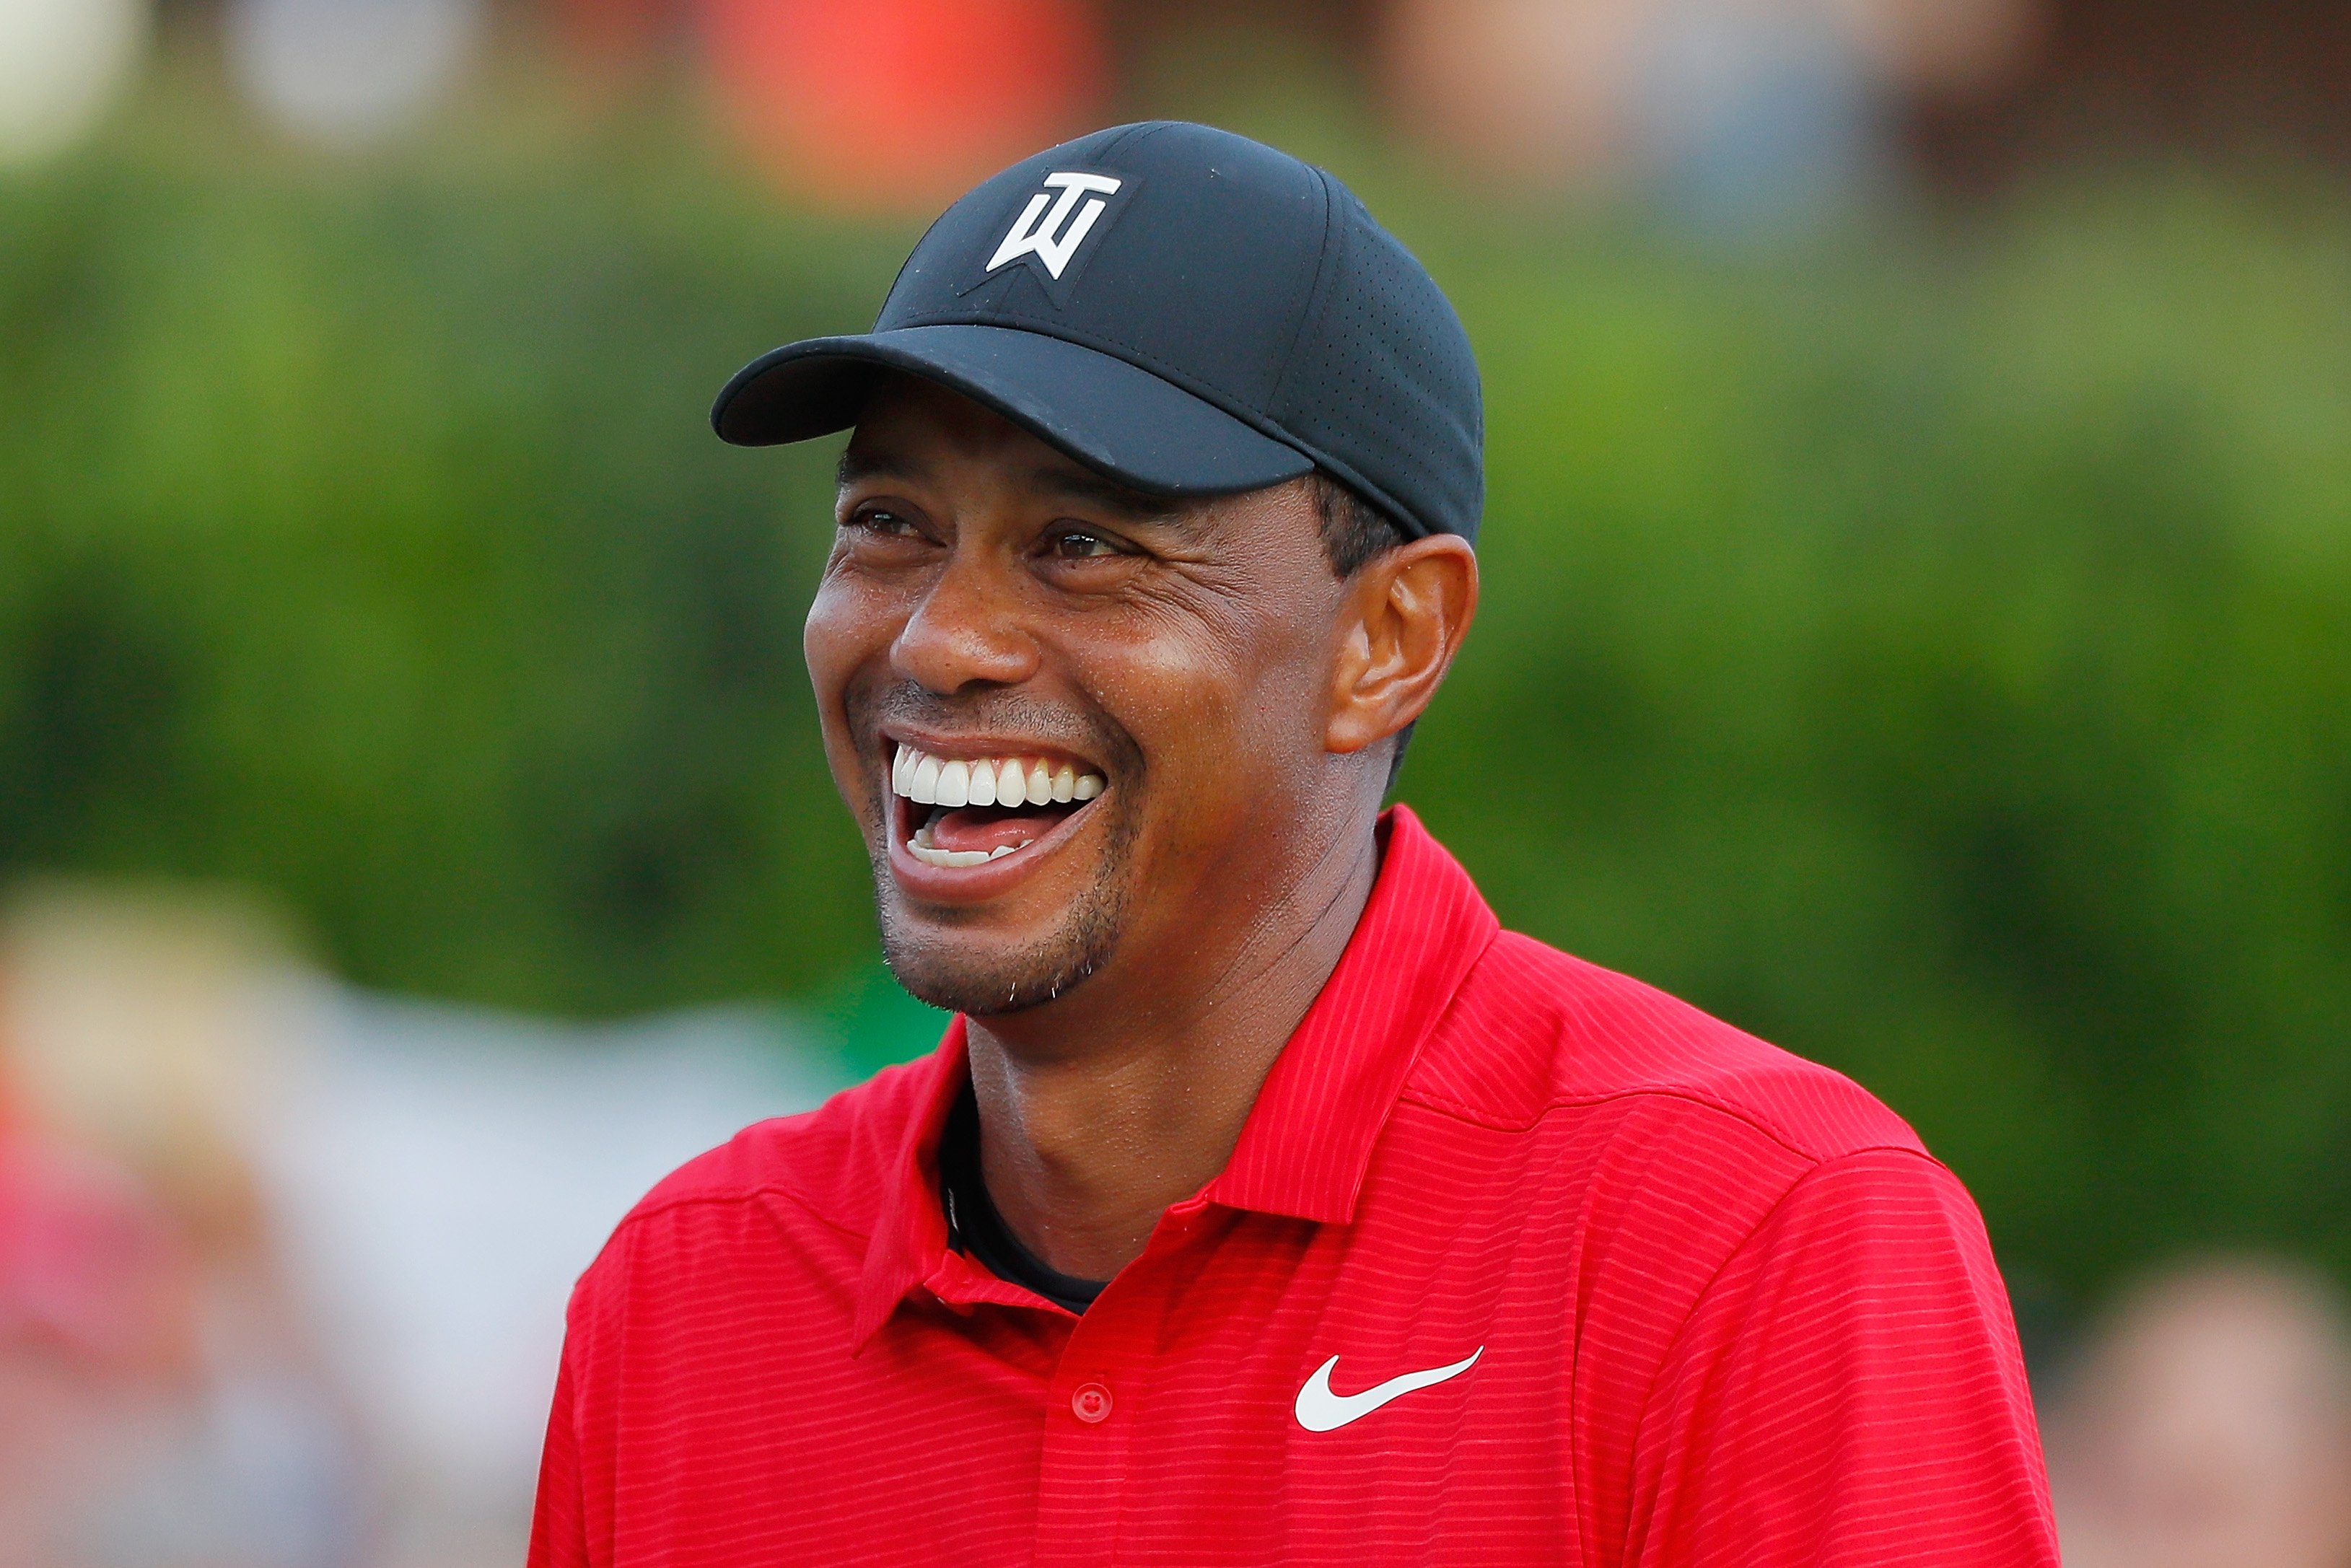 Tiger Woods pictured at the trophy presentation ceremony after winning the TOUR Championship at East Lake Golf Club, 2018, Atlanta, Georgia. | Photo: Getty Images 